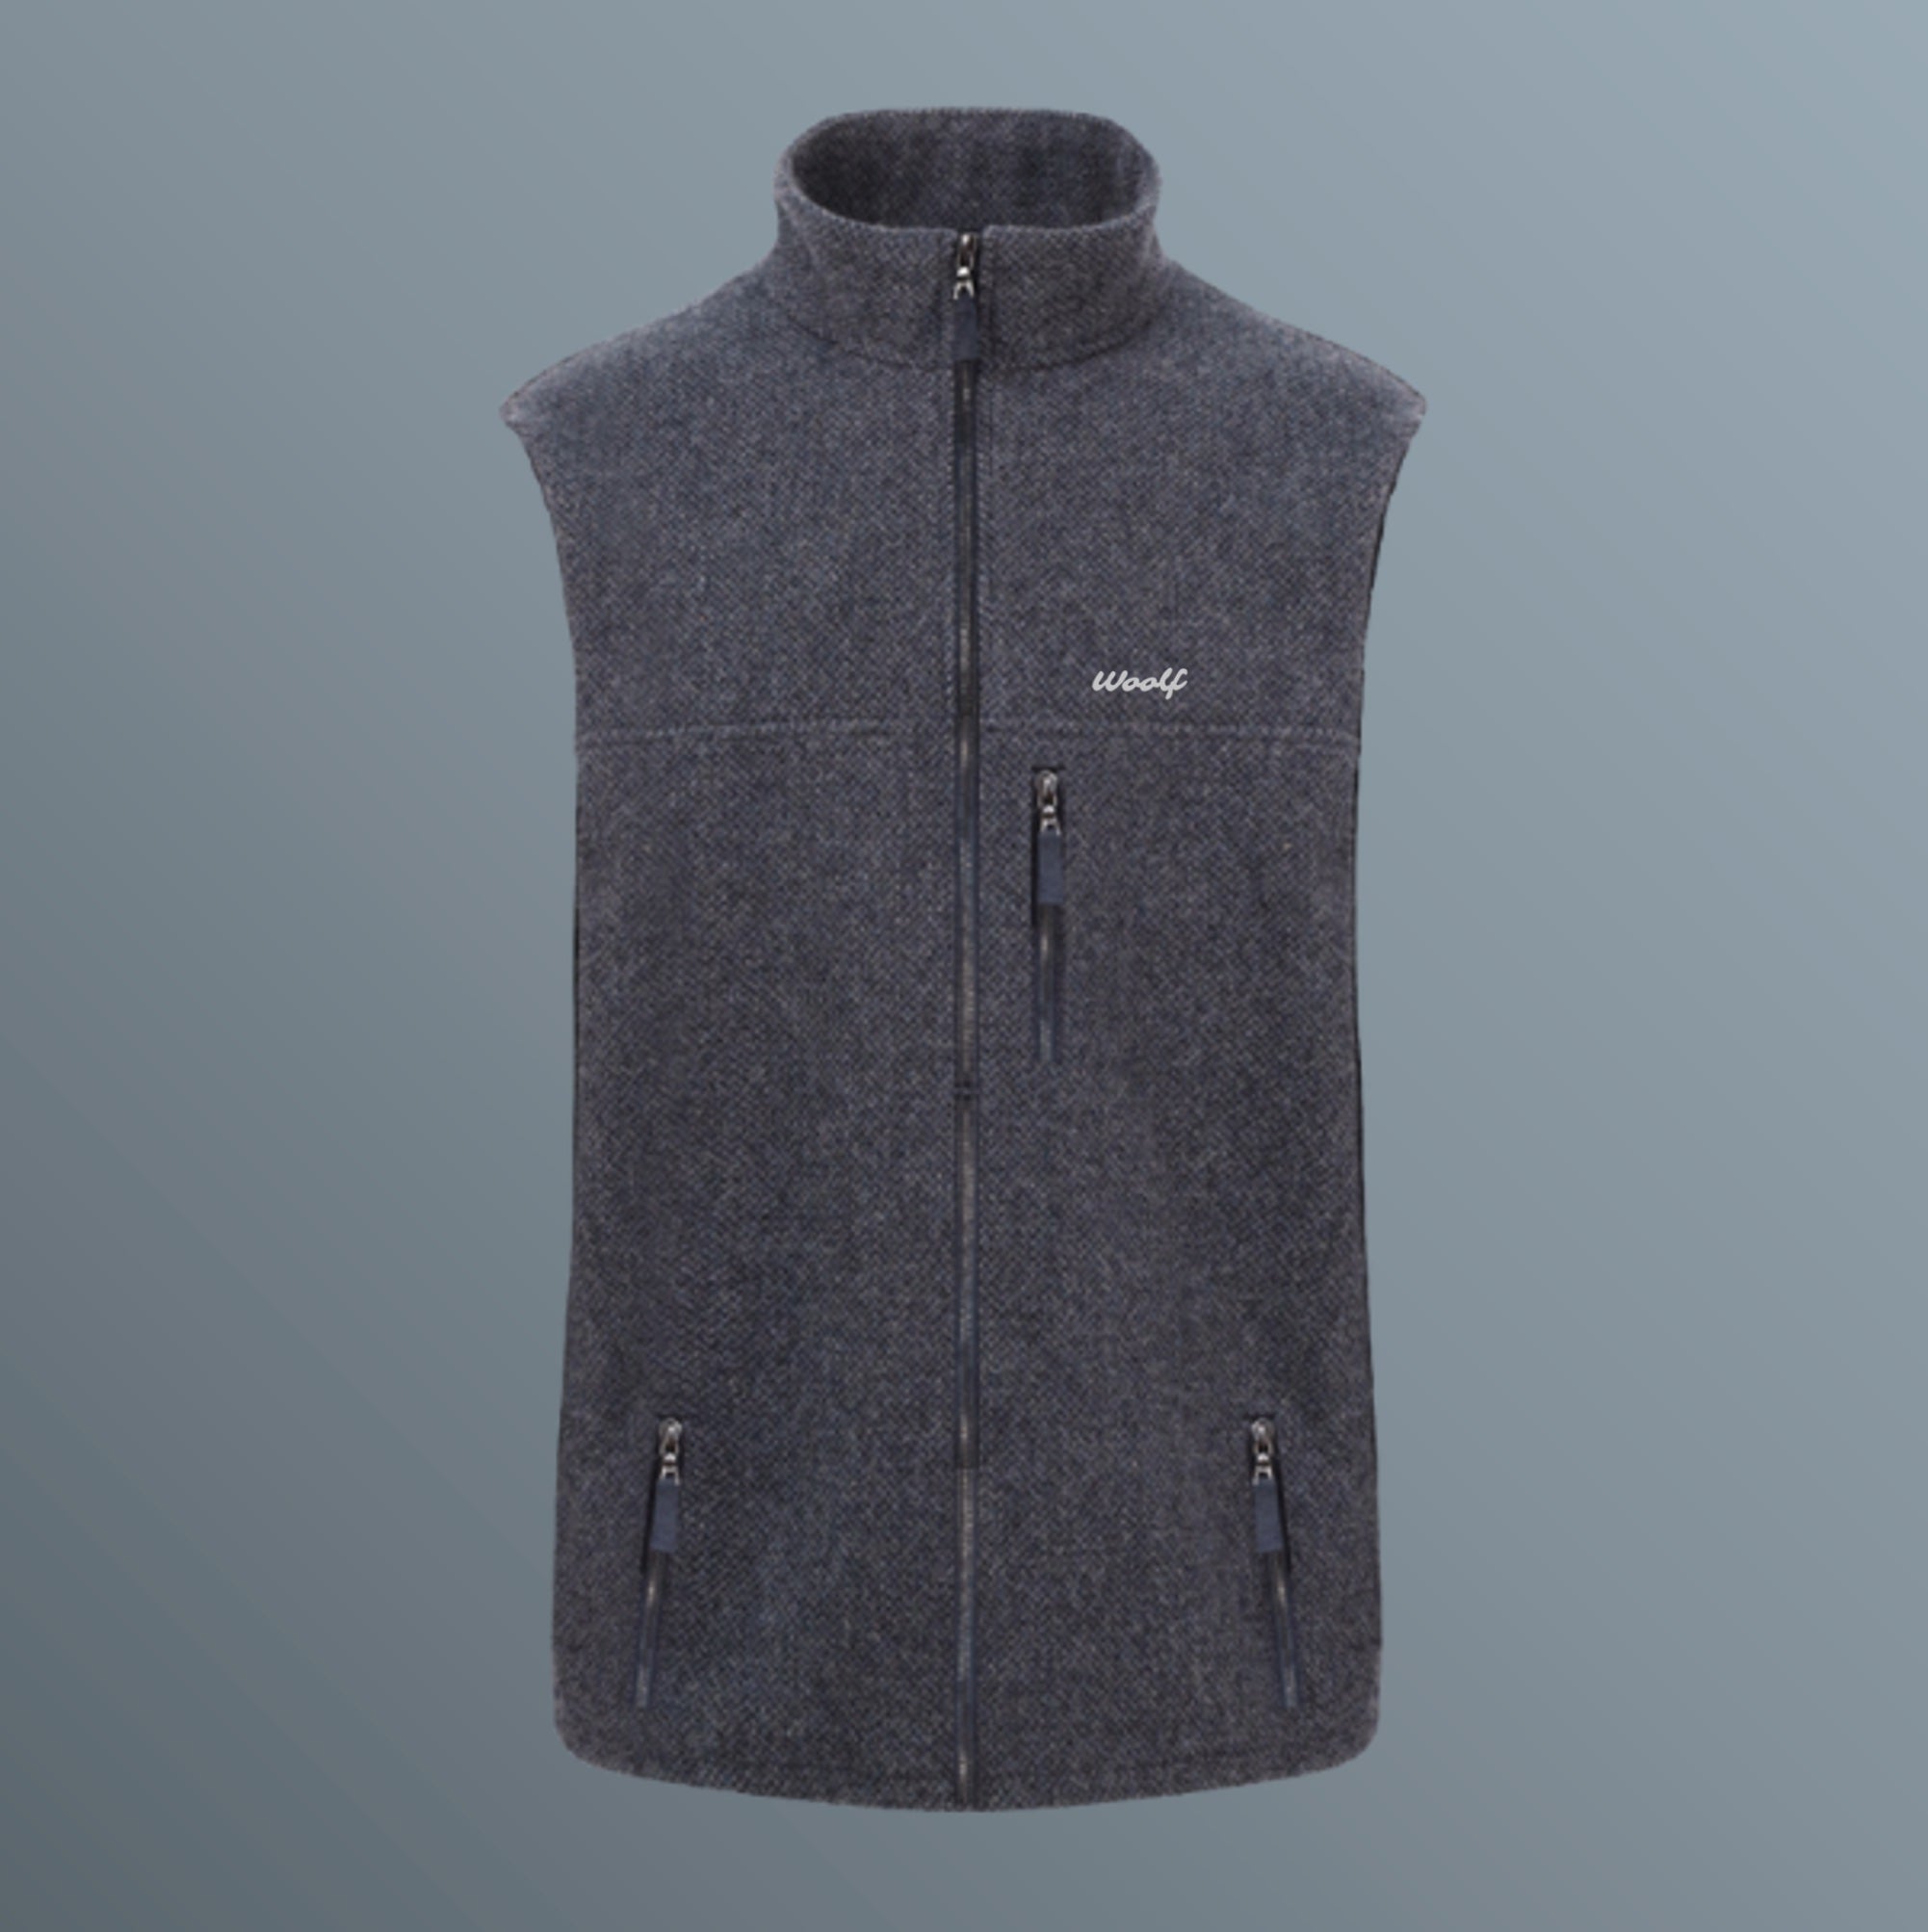 Women's PureFleece 100% Merino Wool mid layer Gilet. Created with our unique weave for superior performance over knitted merino fleece tops.